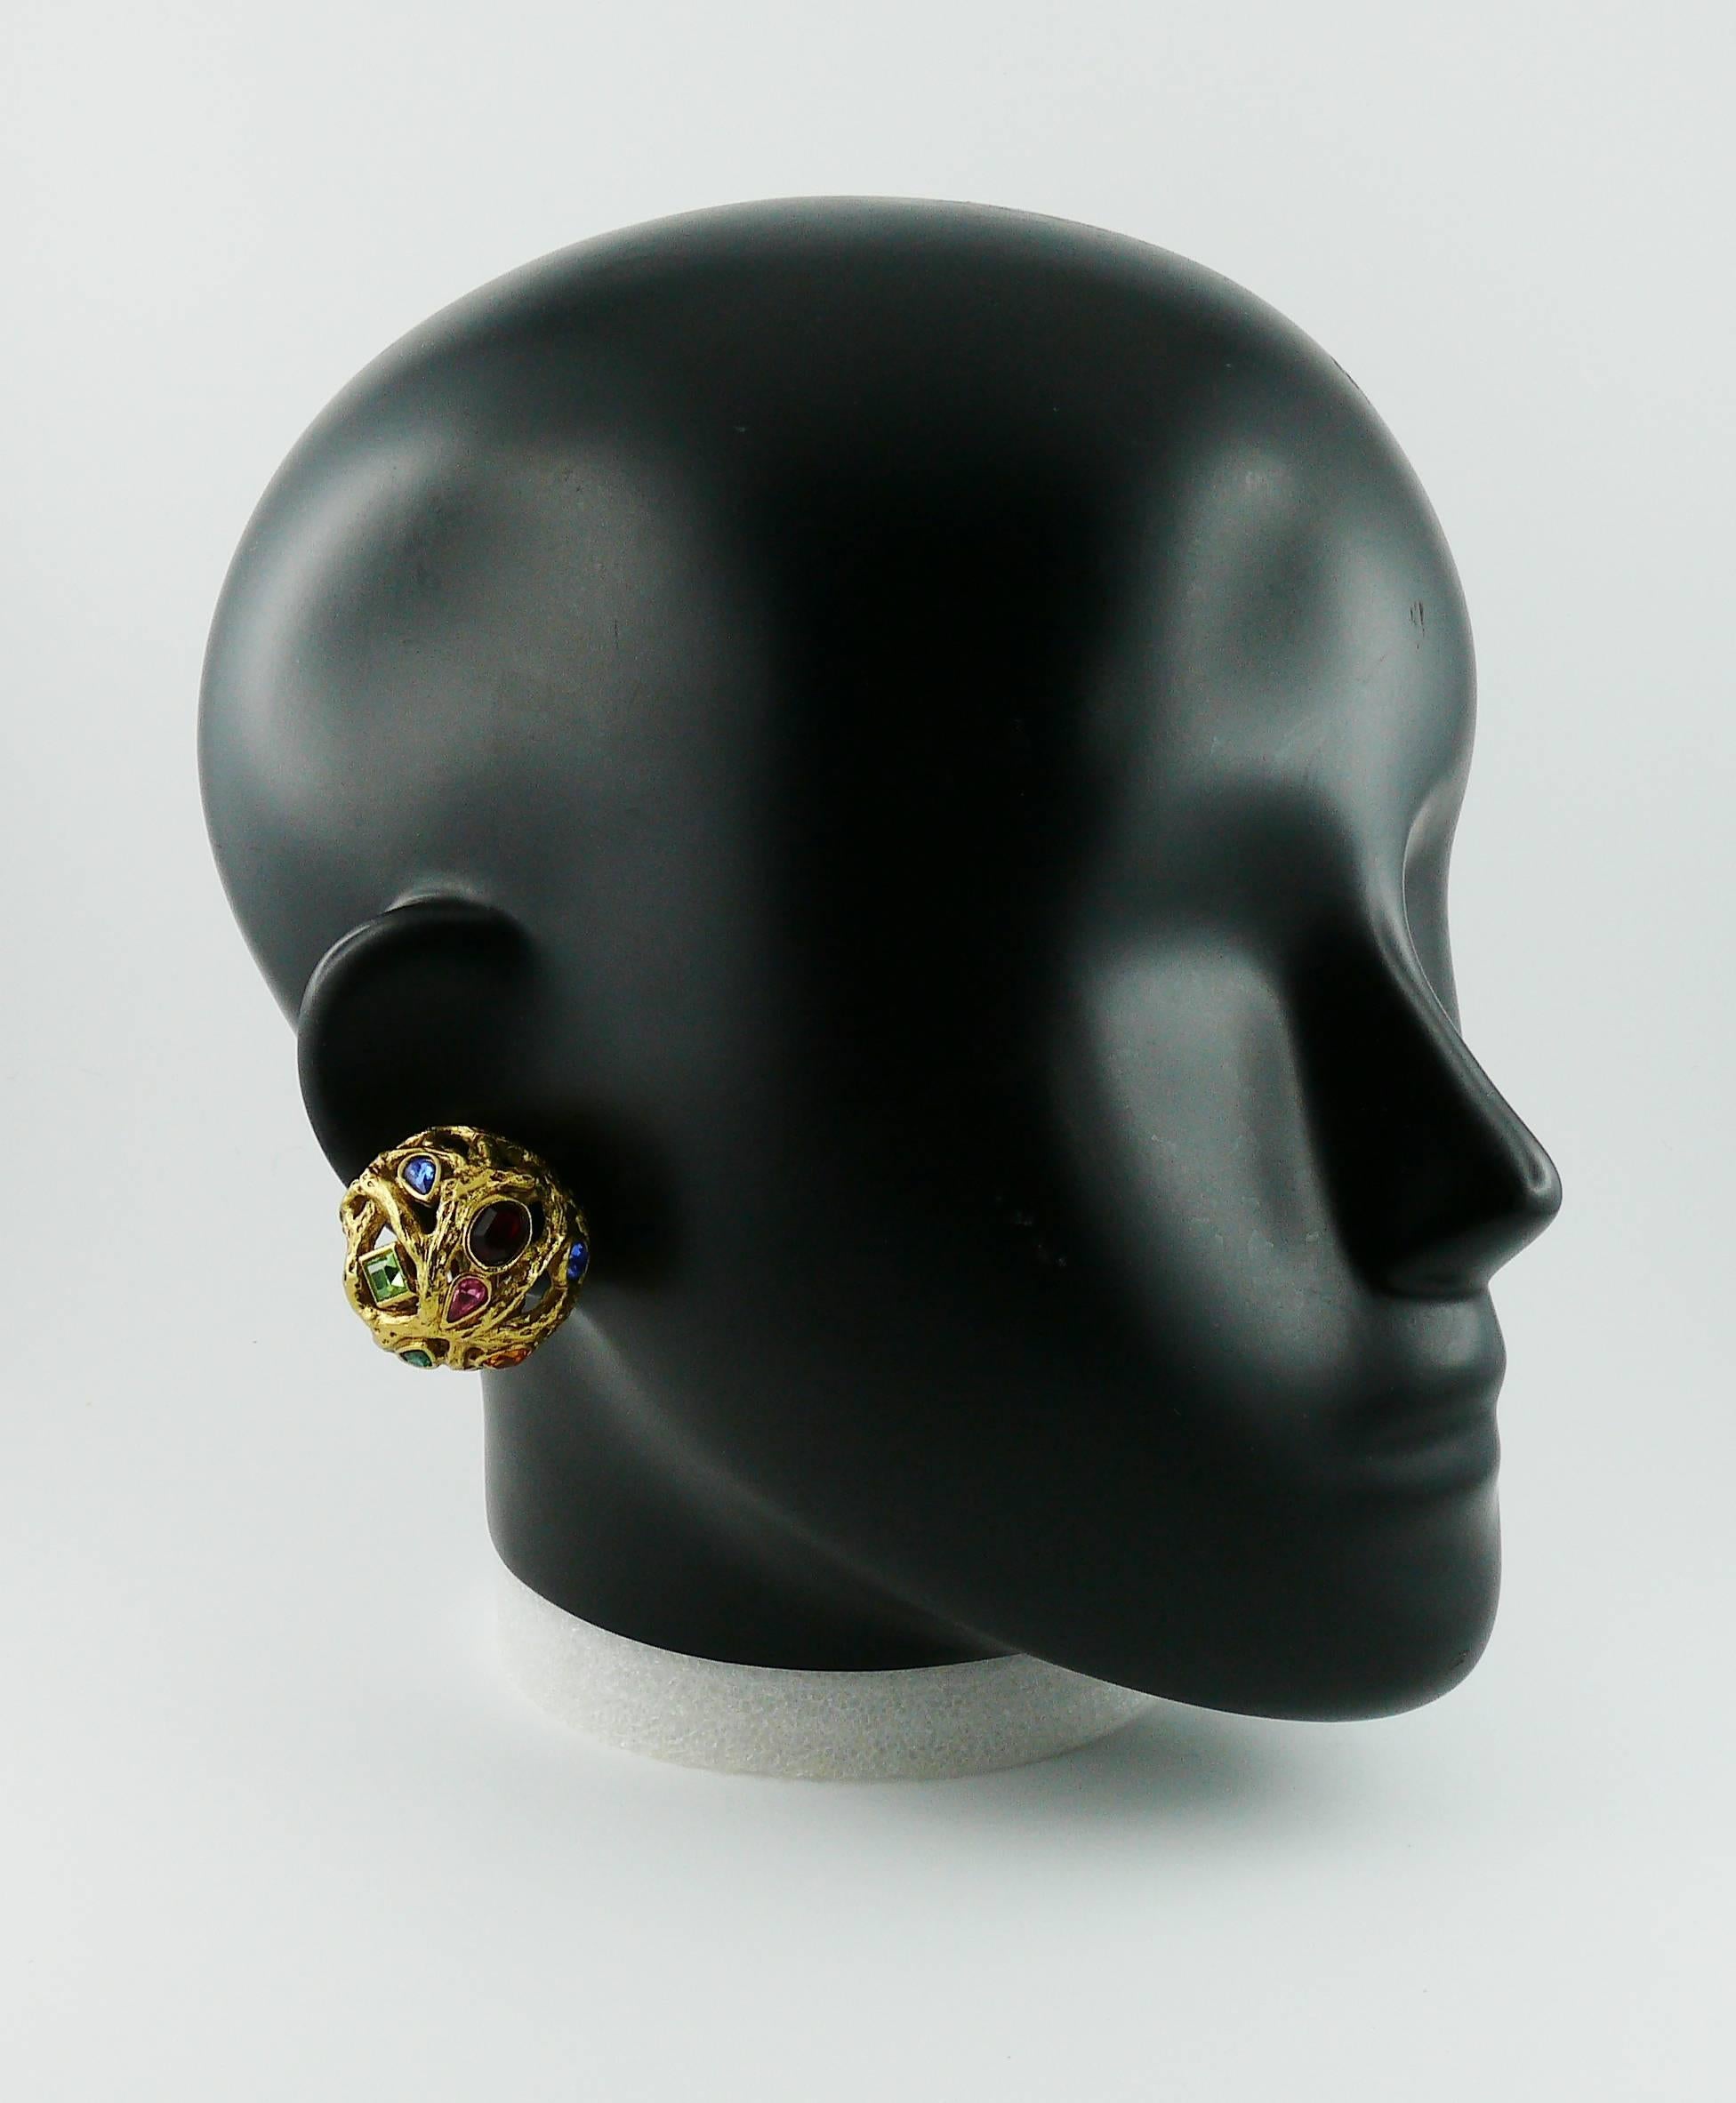 YVES SAINT LAURENT vintage gold tone domed clip-on earrings with mulicolored crystal embellishement.

These earrings feature a gorgeous openwork "branch" design.

Marked YSL Made in France.

JEWELRY CONDITION CHART
- New or never worn :